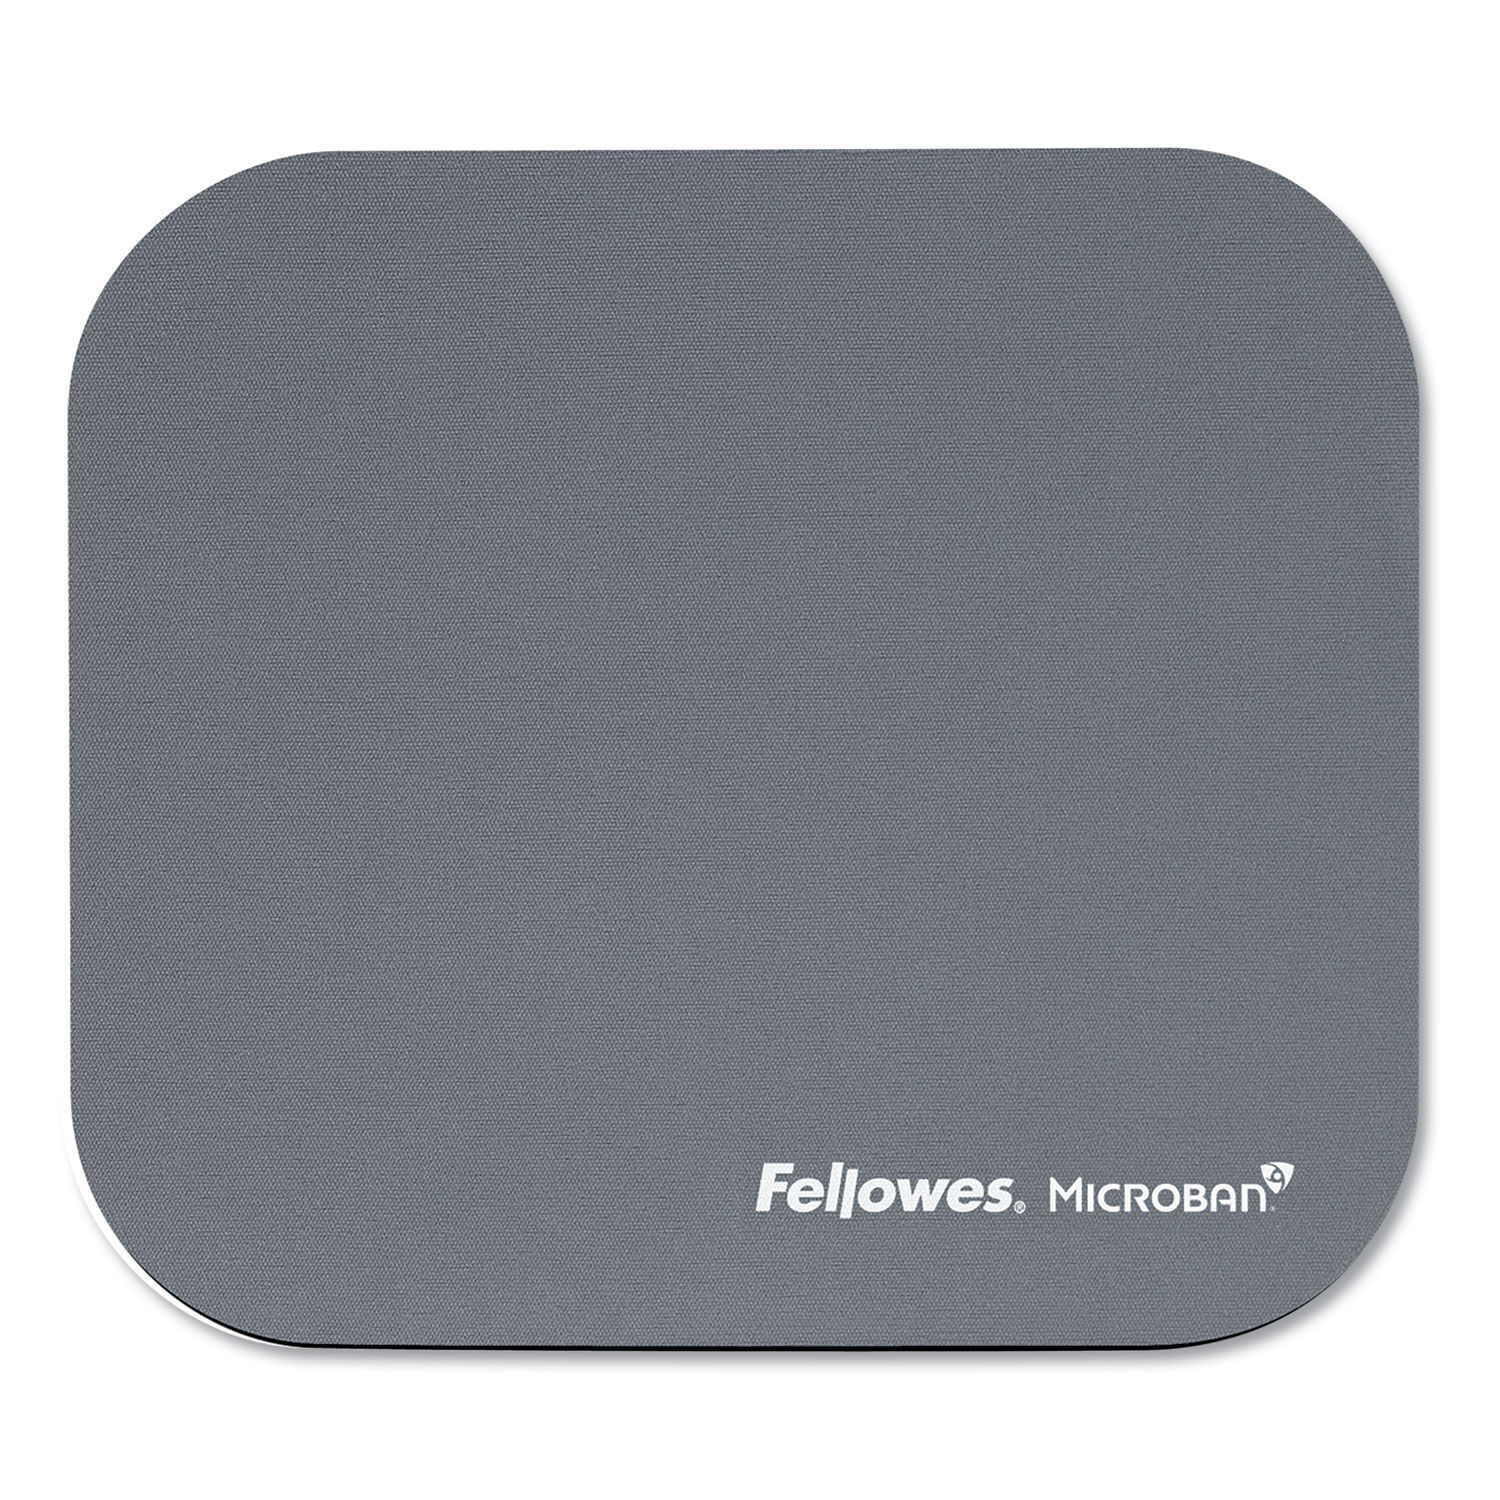 Mouse Pad with Microban Protection 9 x 8, Graphite